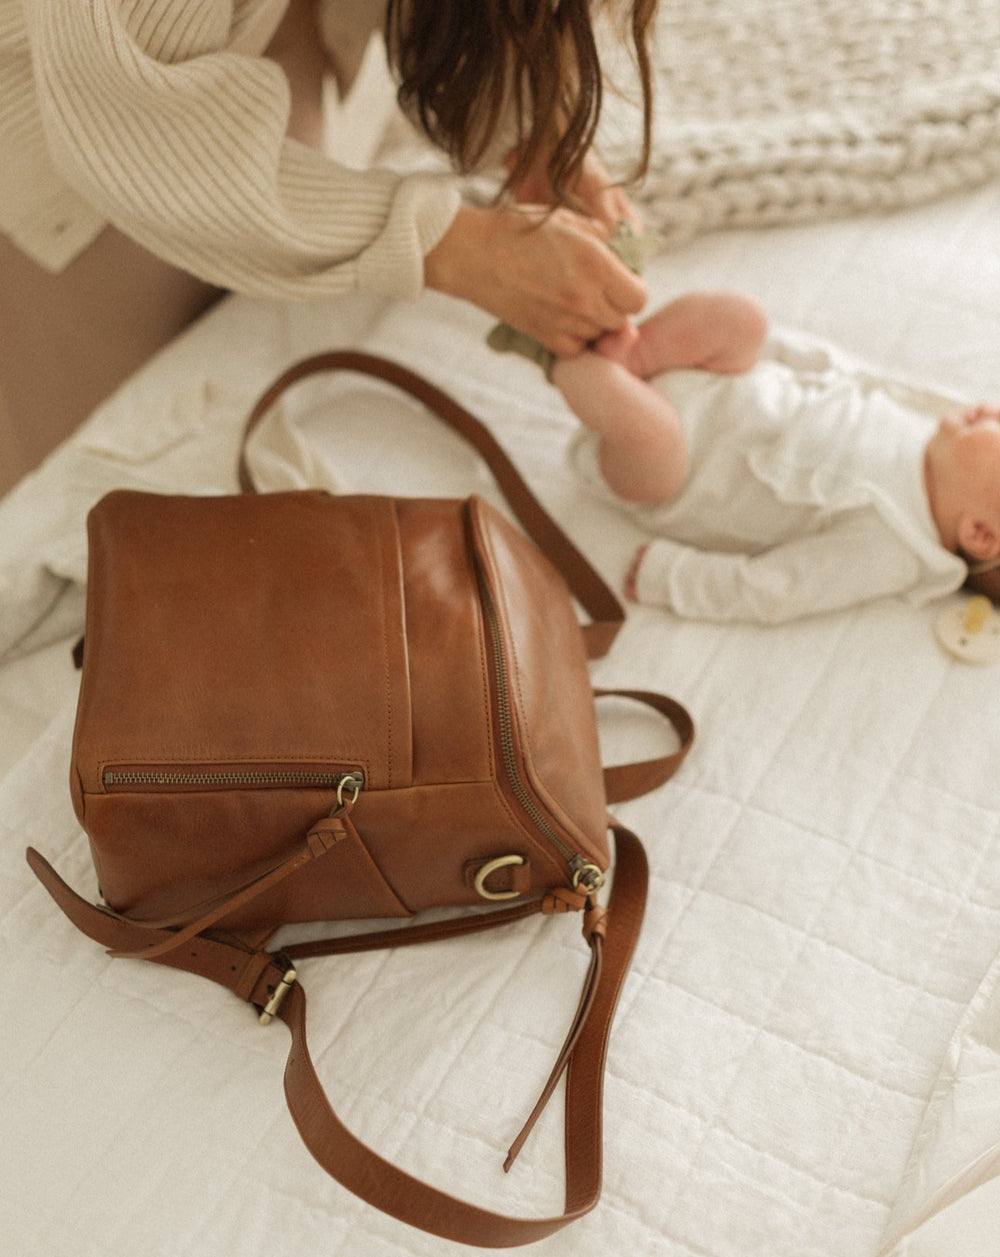 No better companion, the Madeleine bag will carry everything you